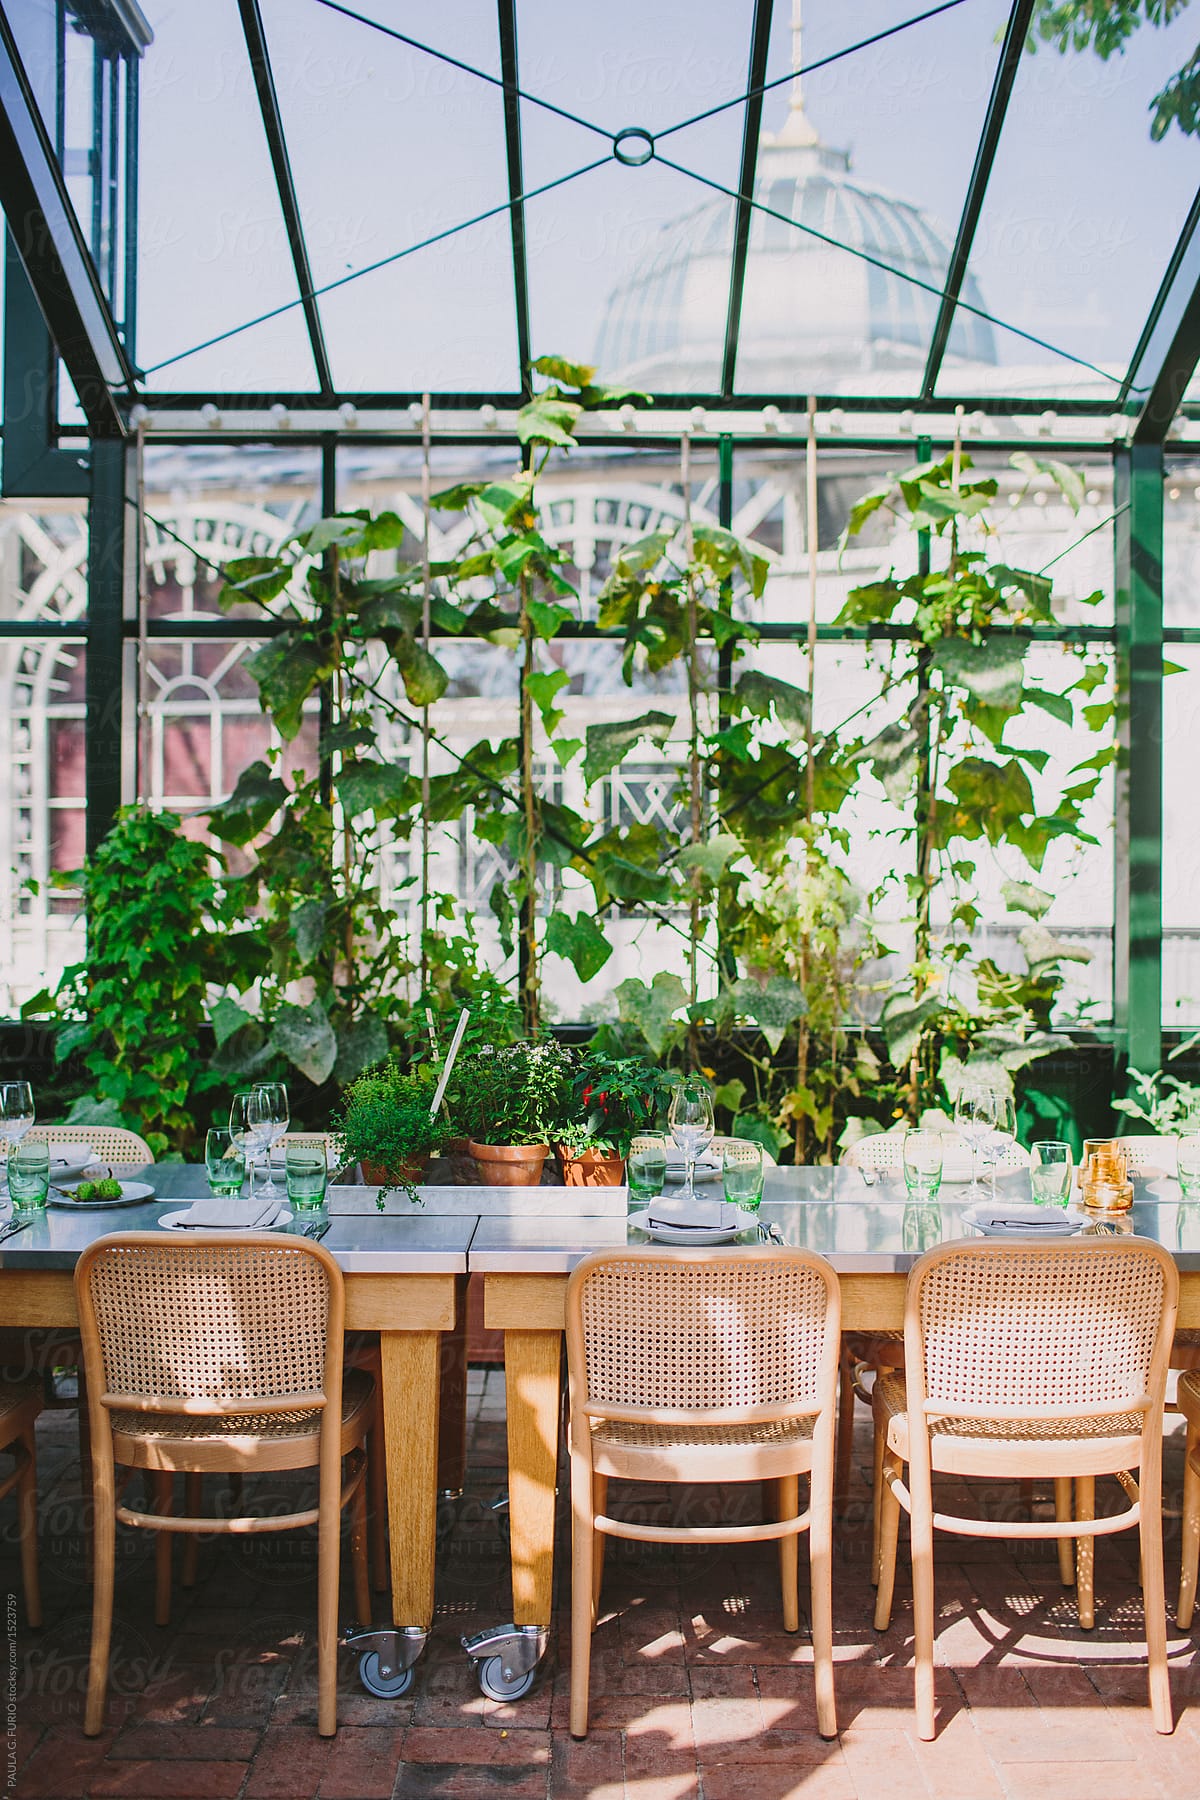 Lunch in a greenhouse